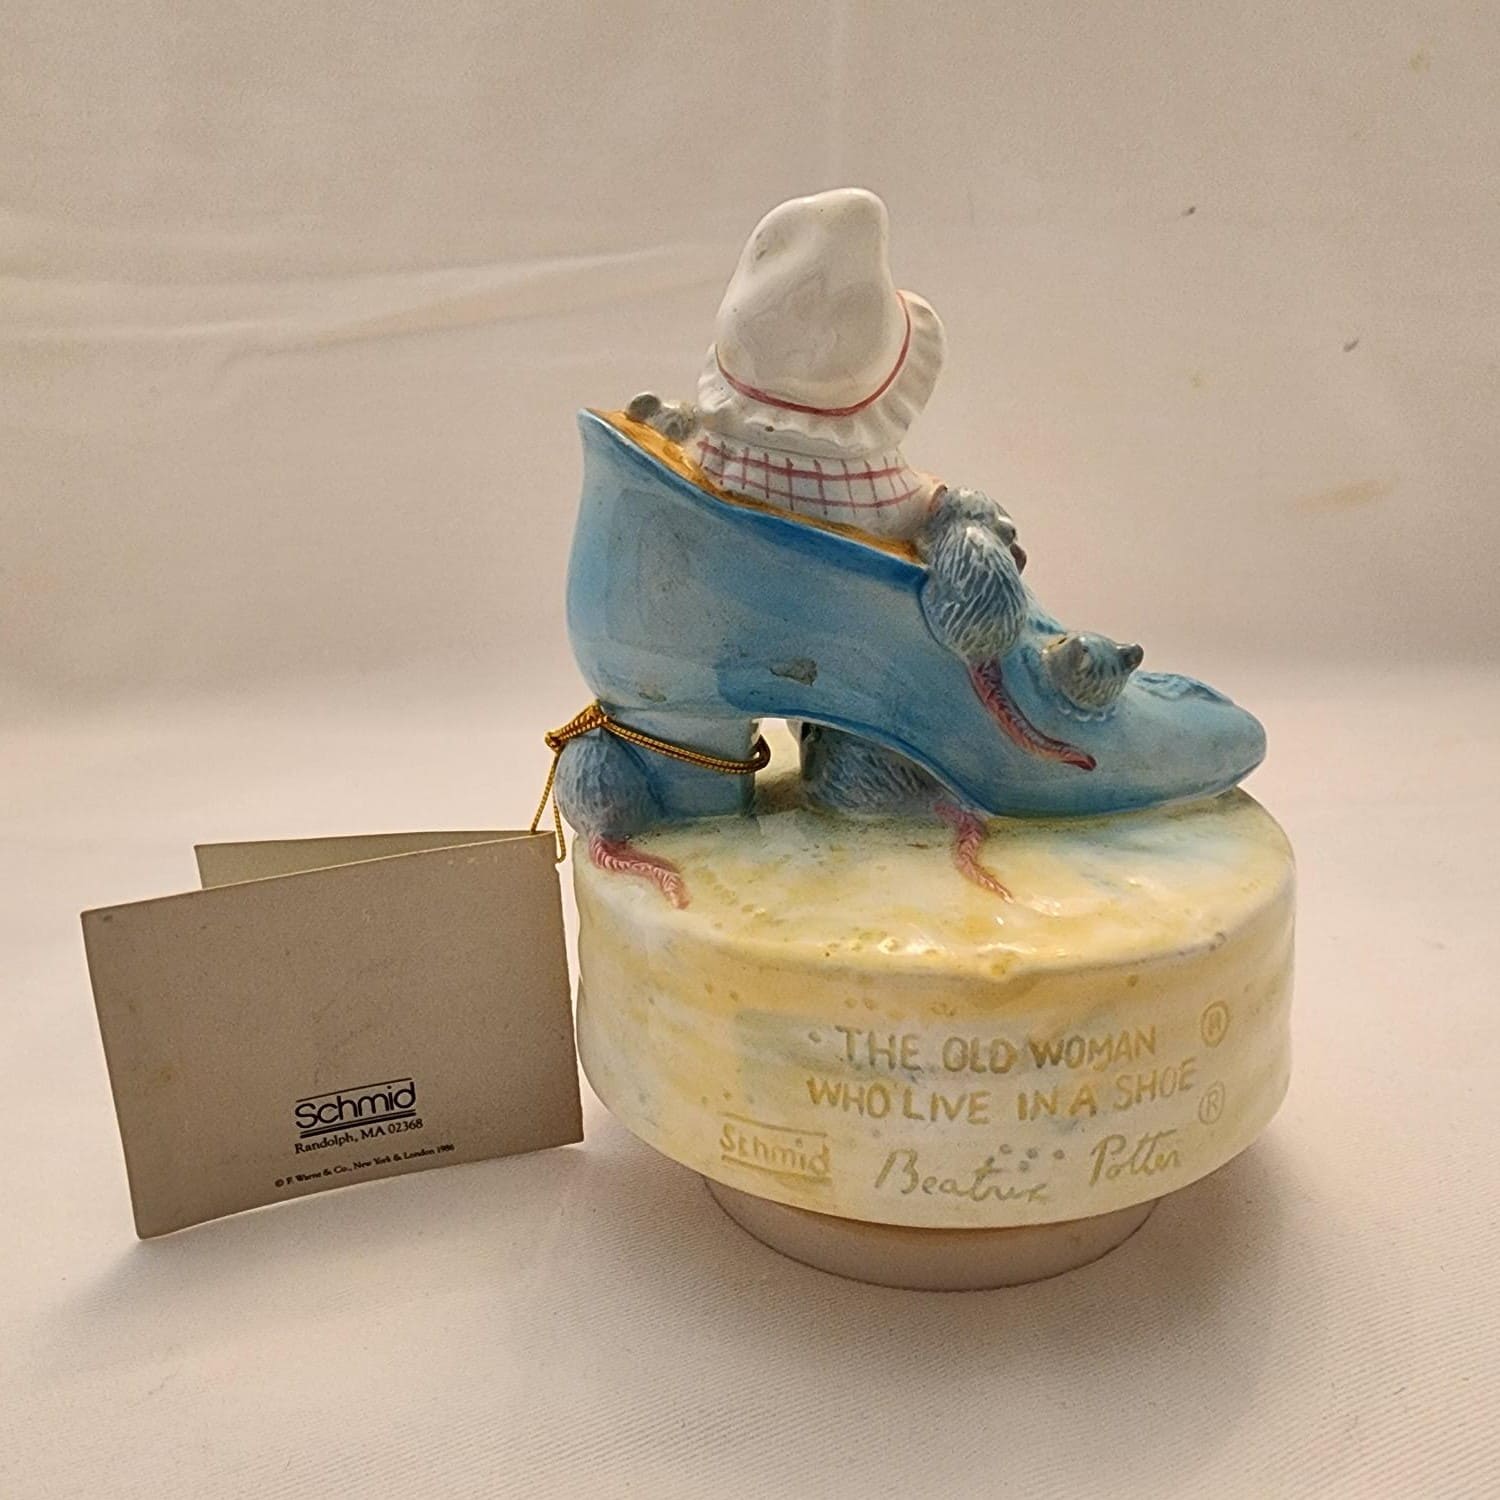 A mouse figurine perched on a shoe.